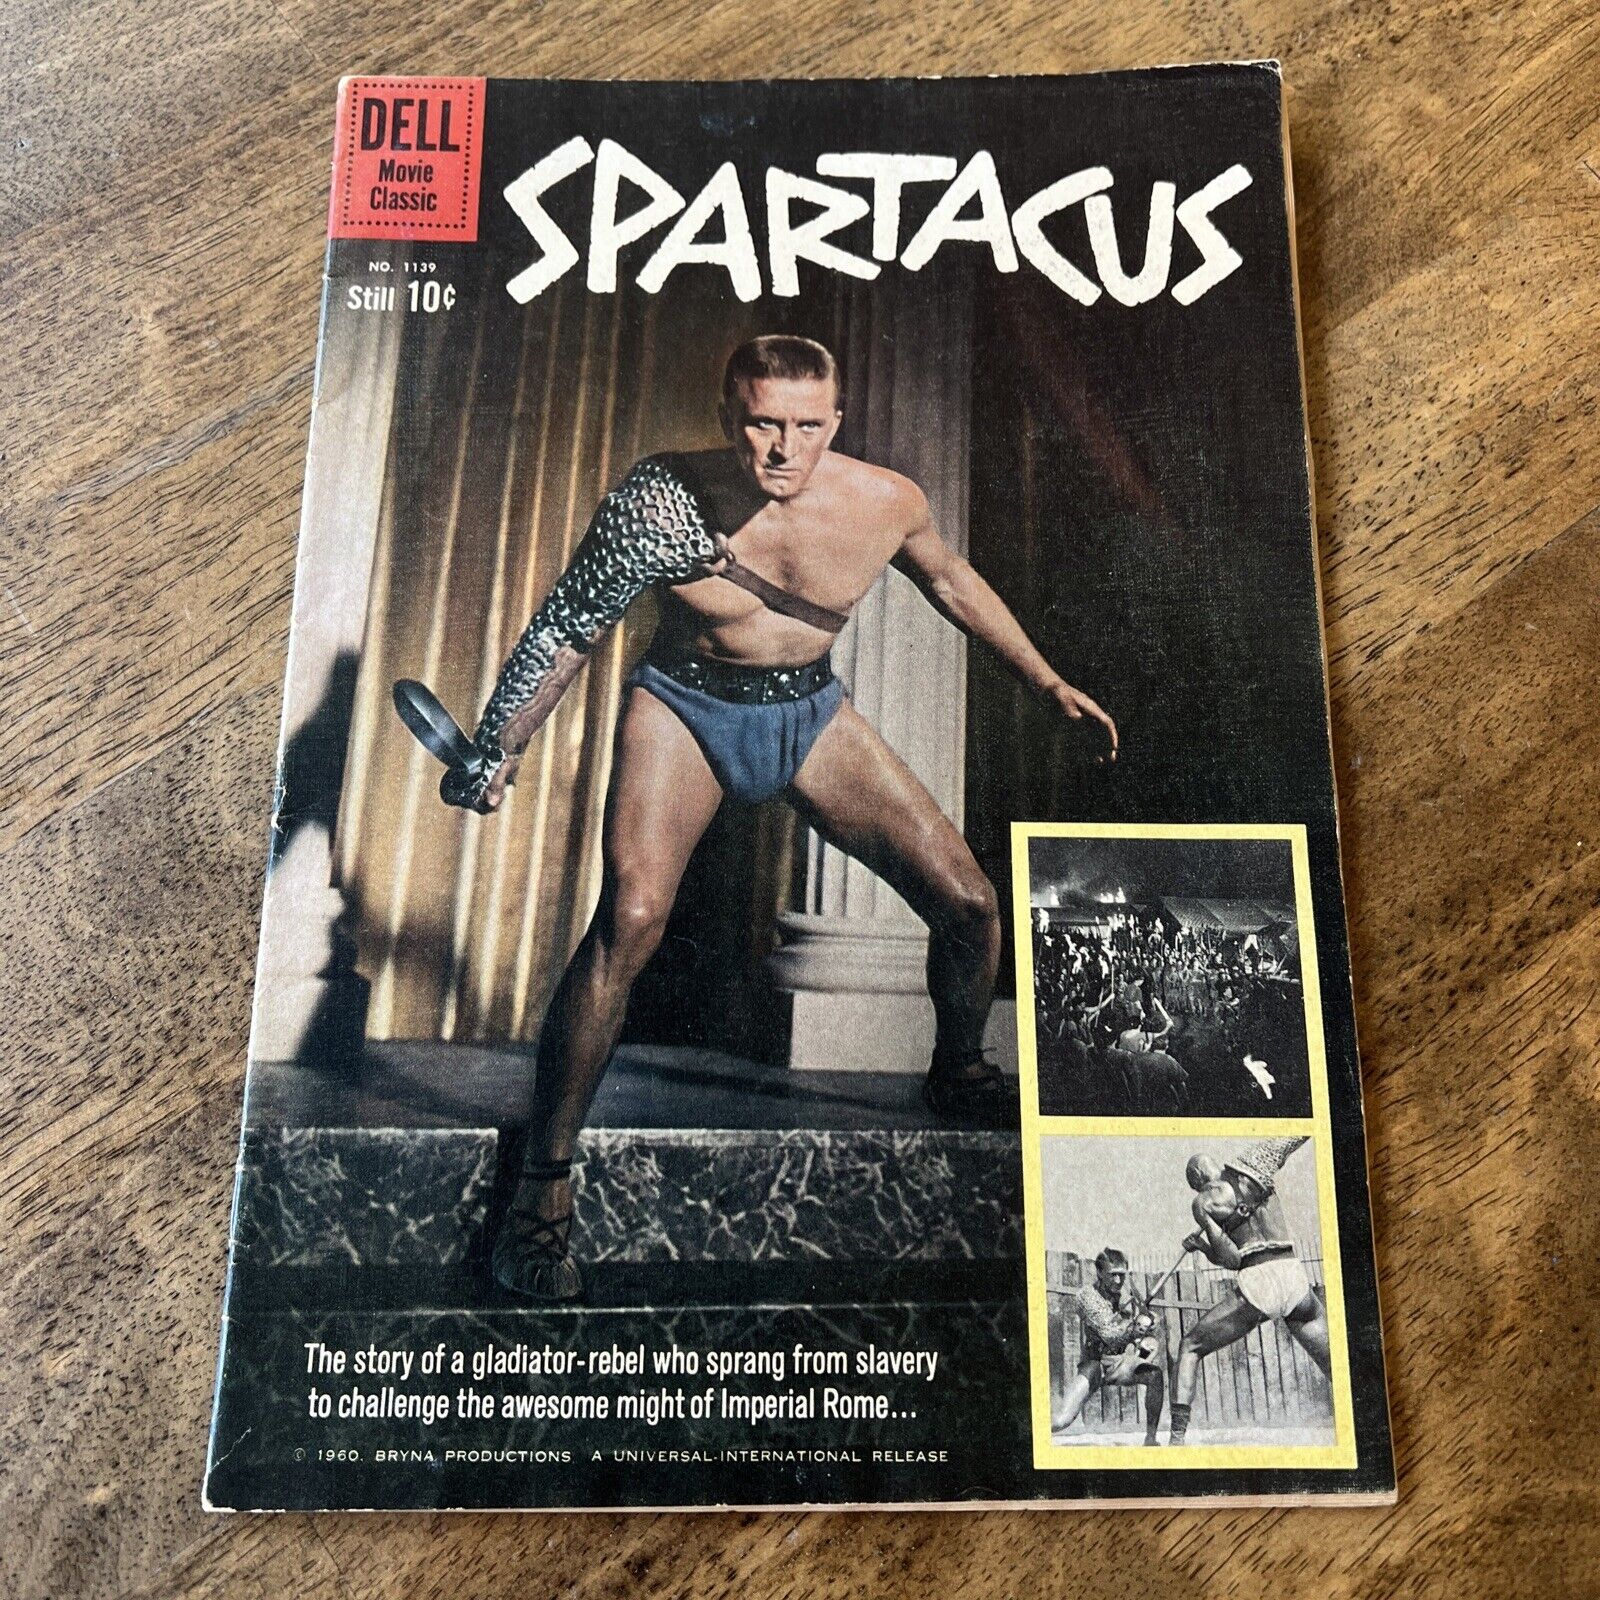 SPARTACUS #1139 Dell Four Color Movie Comic - ONE OWNER / VERY GOOD